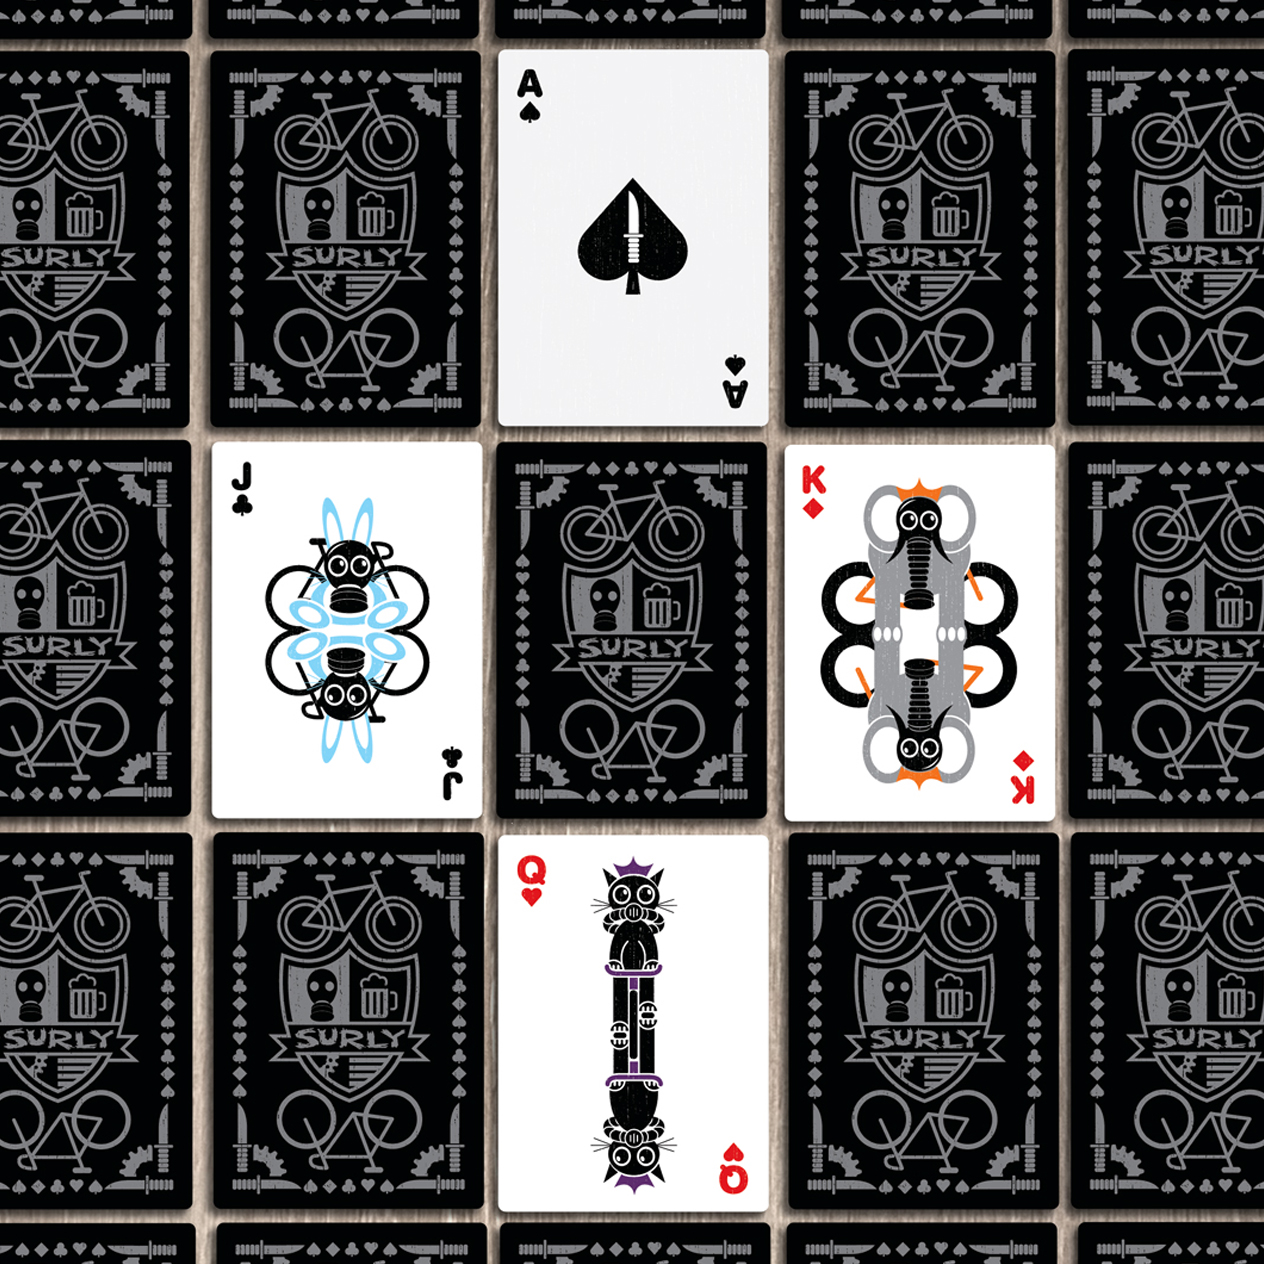 AWC_Site_Designs_Layers_0007_Playing_Cards_Spread